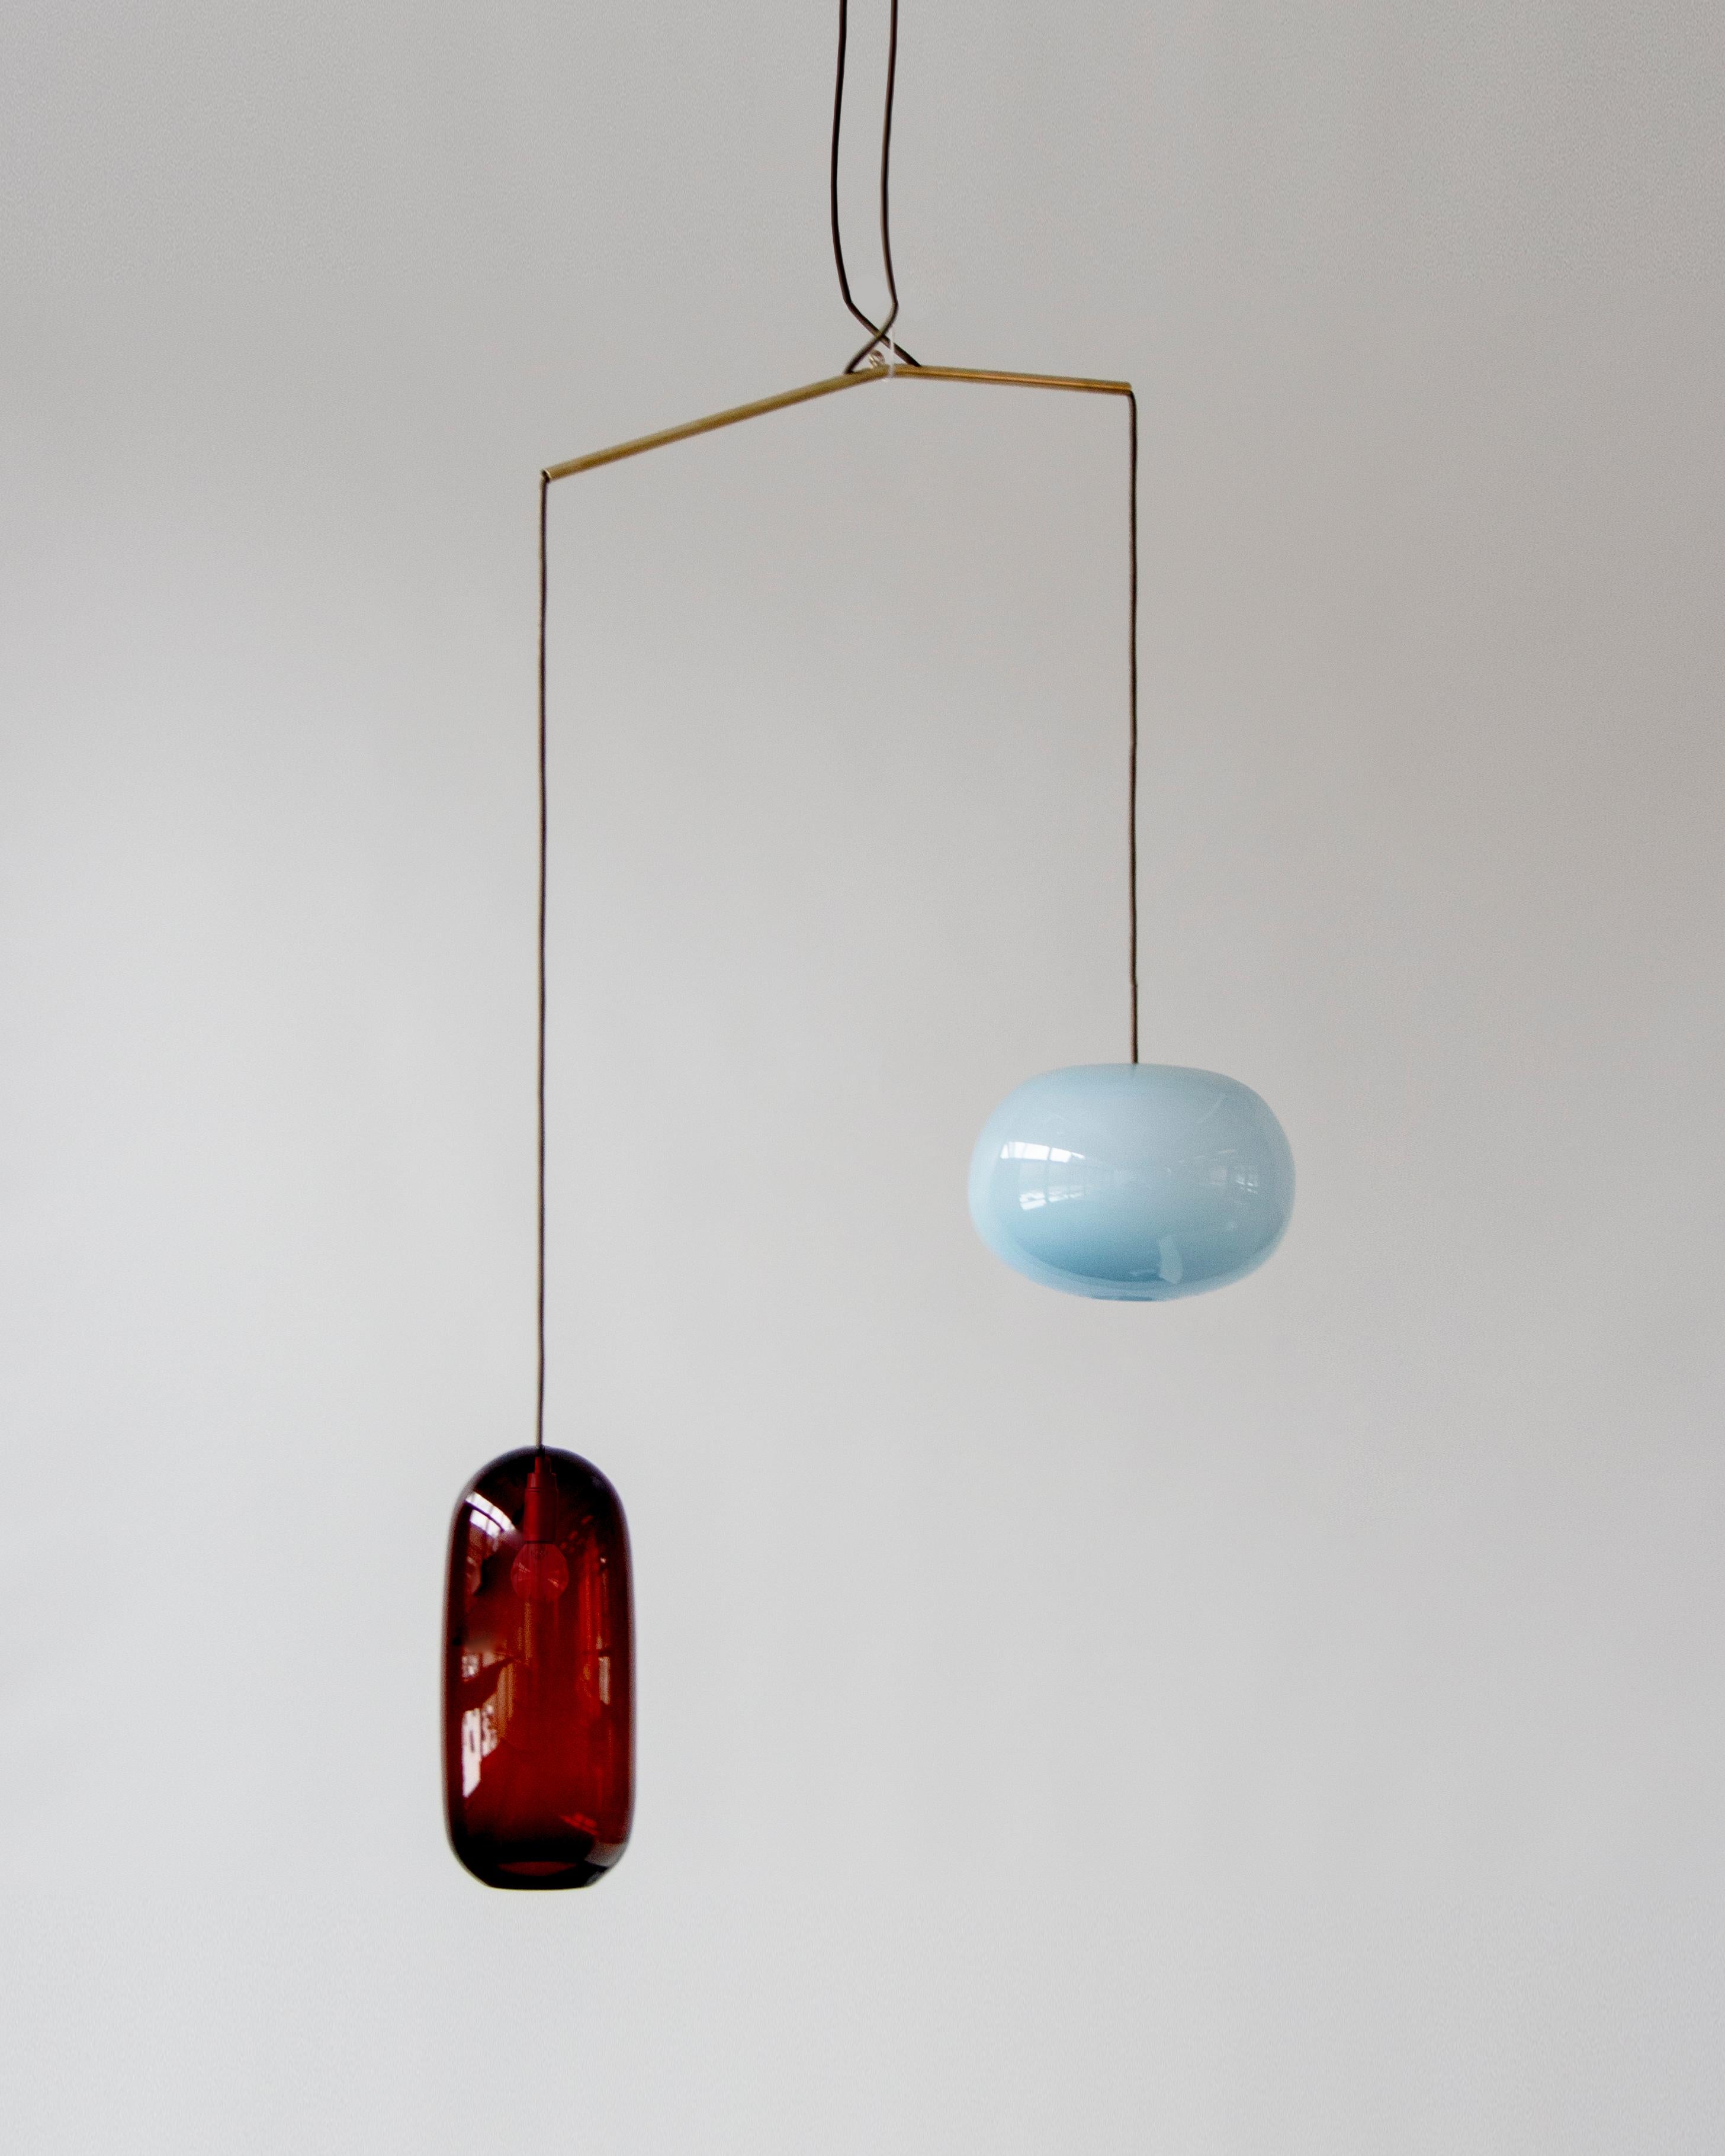 Sculptural light No. 64 by Milla Vaahtera
Dimensions: W 57 x D 26 x H 60 cm
Materials: glass, brass

In 2020 Milla Vaahtera started a series of unique sculptural lights made out of brass and hand blown glass.
